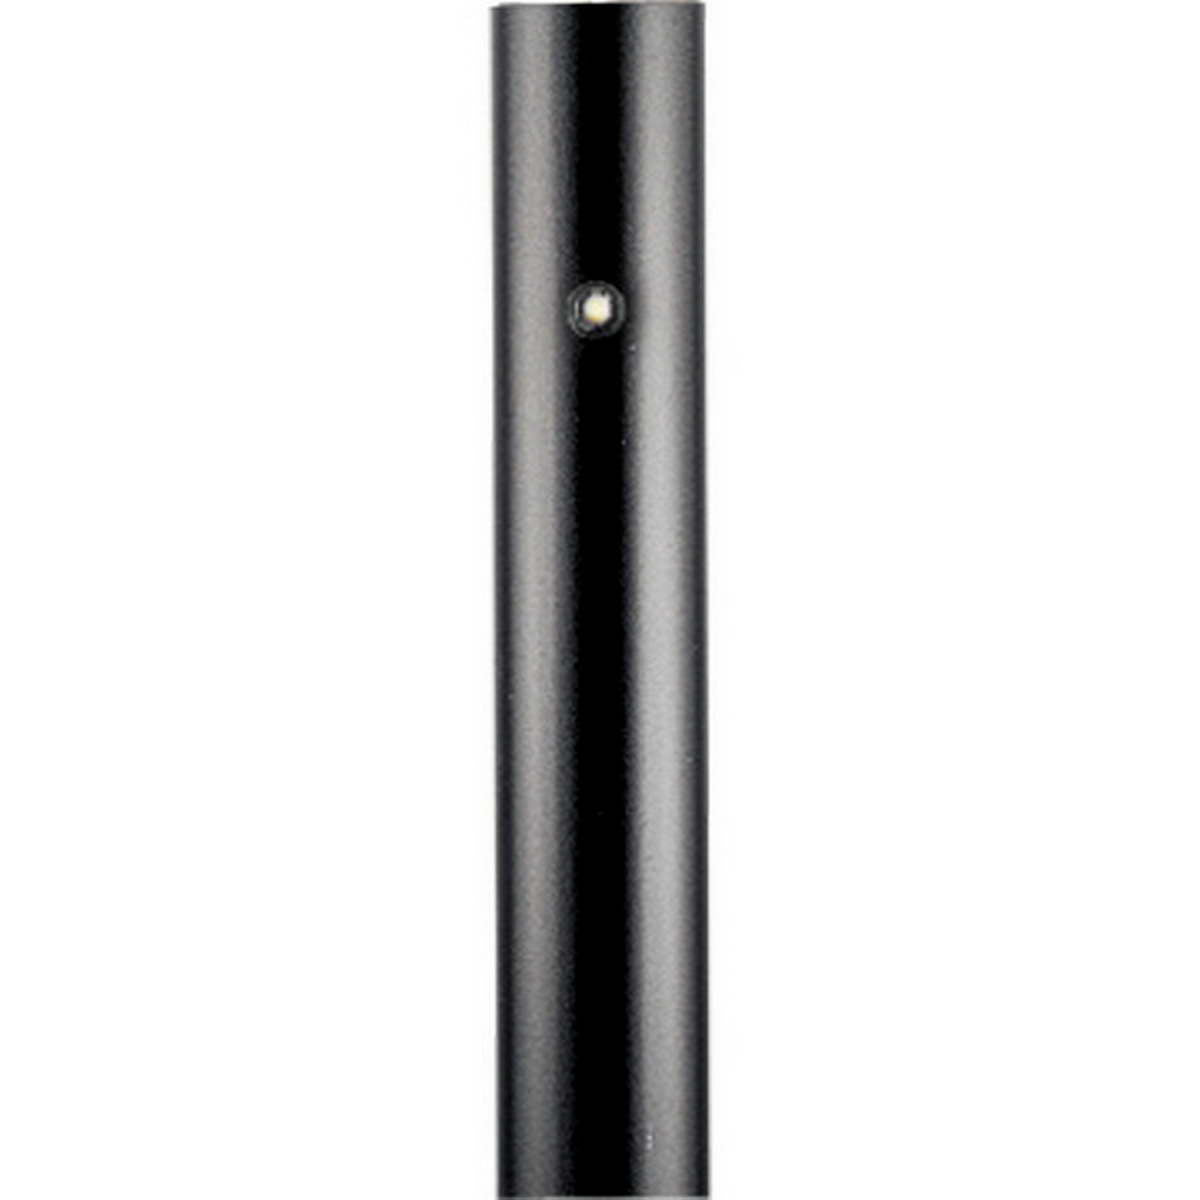 7 Ft Round Aluminum Direct Burial Pole with Photocell 3 In. Shaft Black Finish